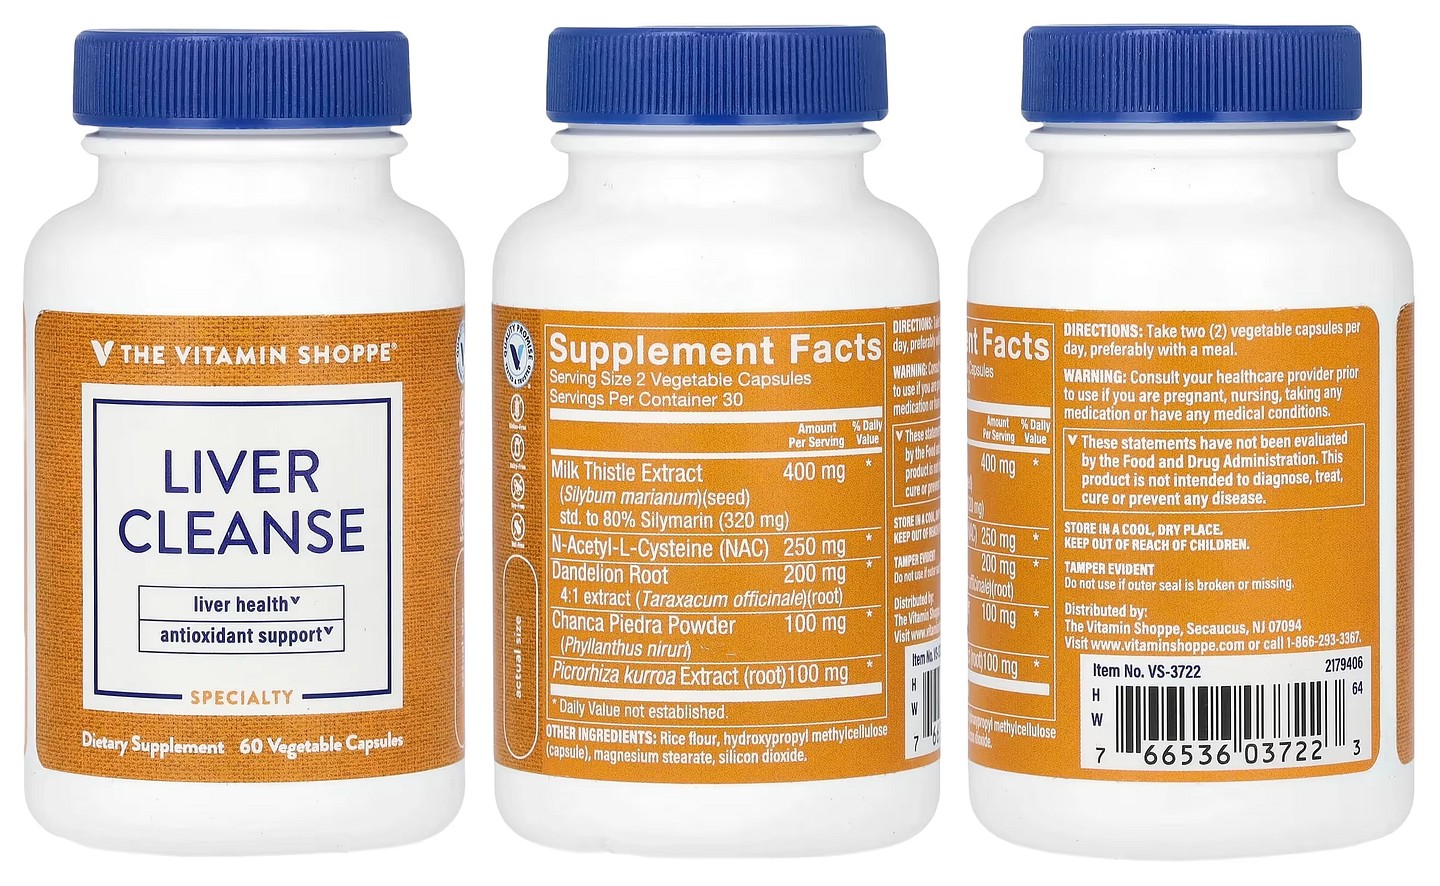 The Vitamin Shoppe, Liver Cleanse packaging